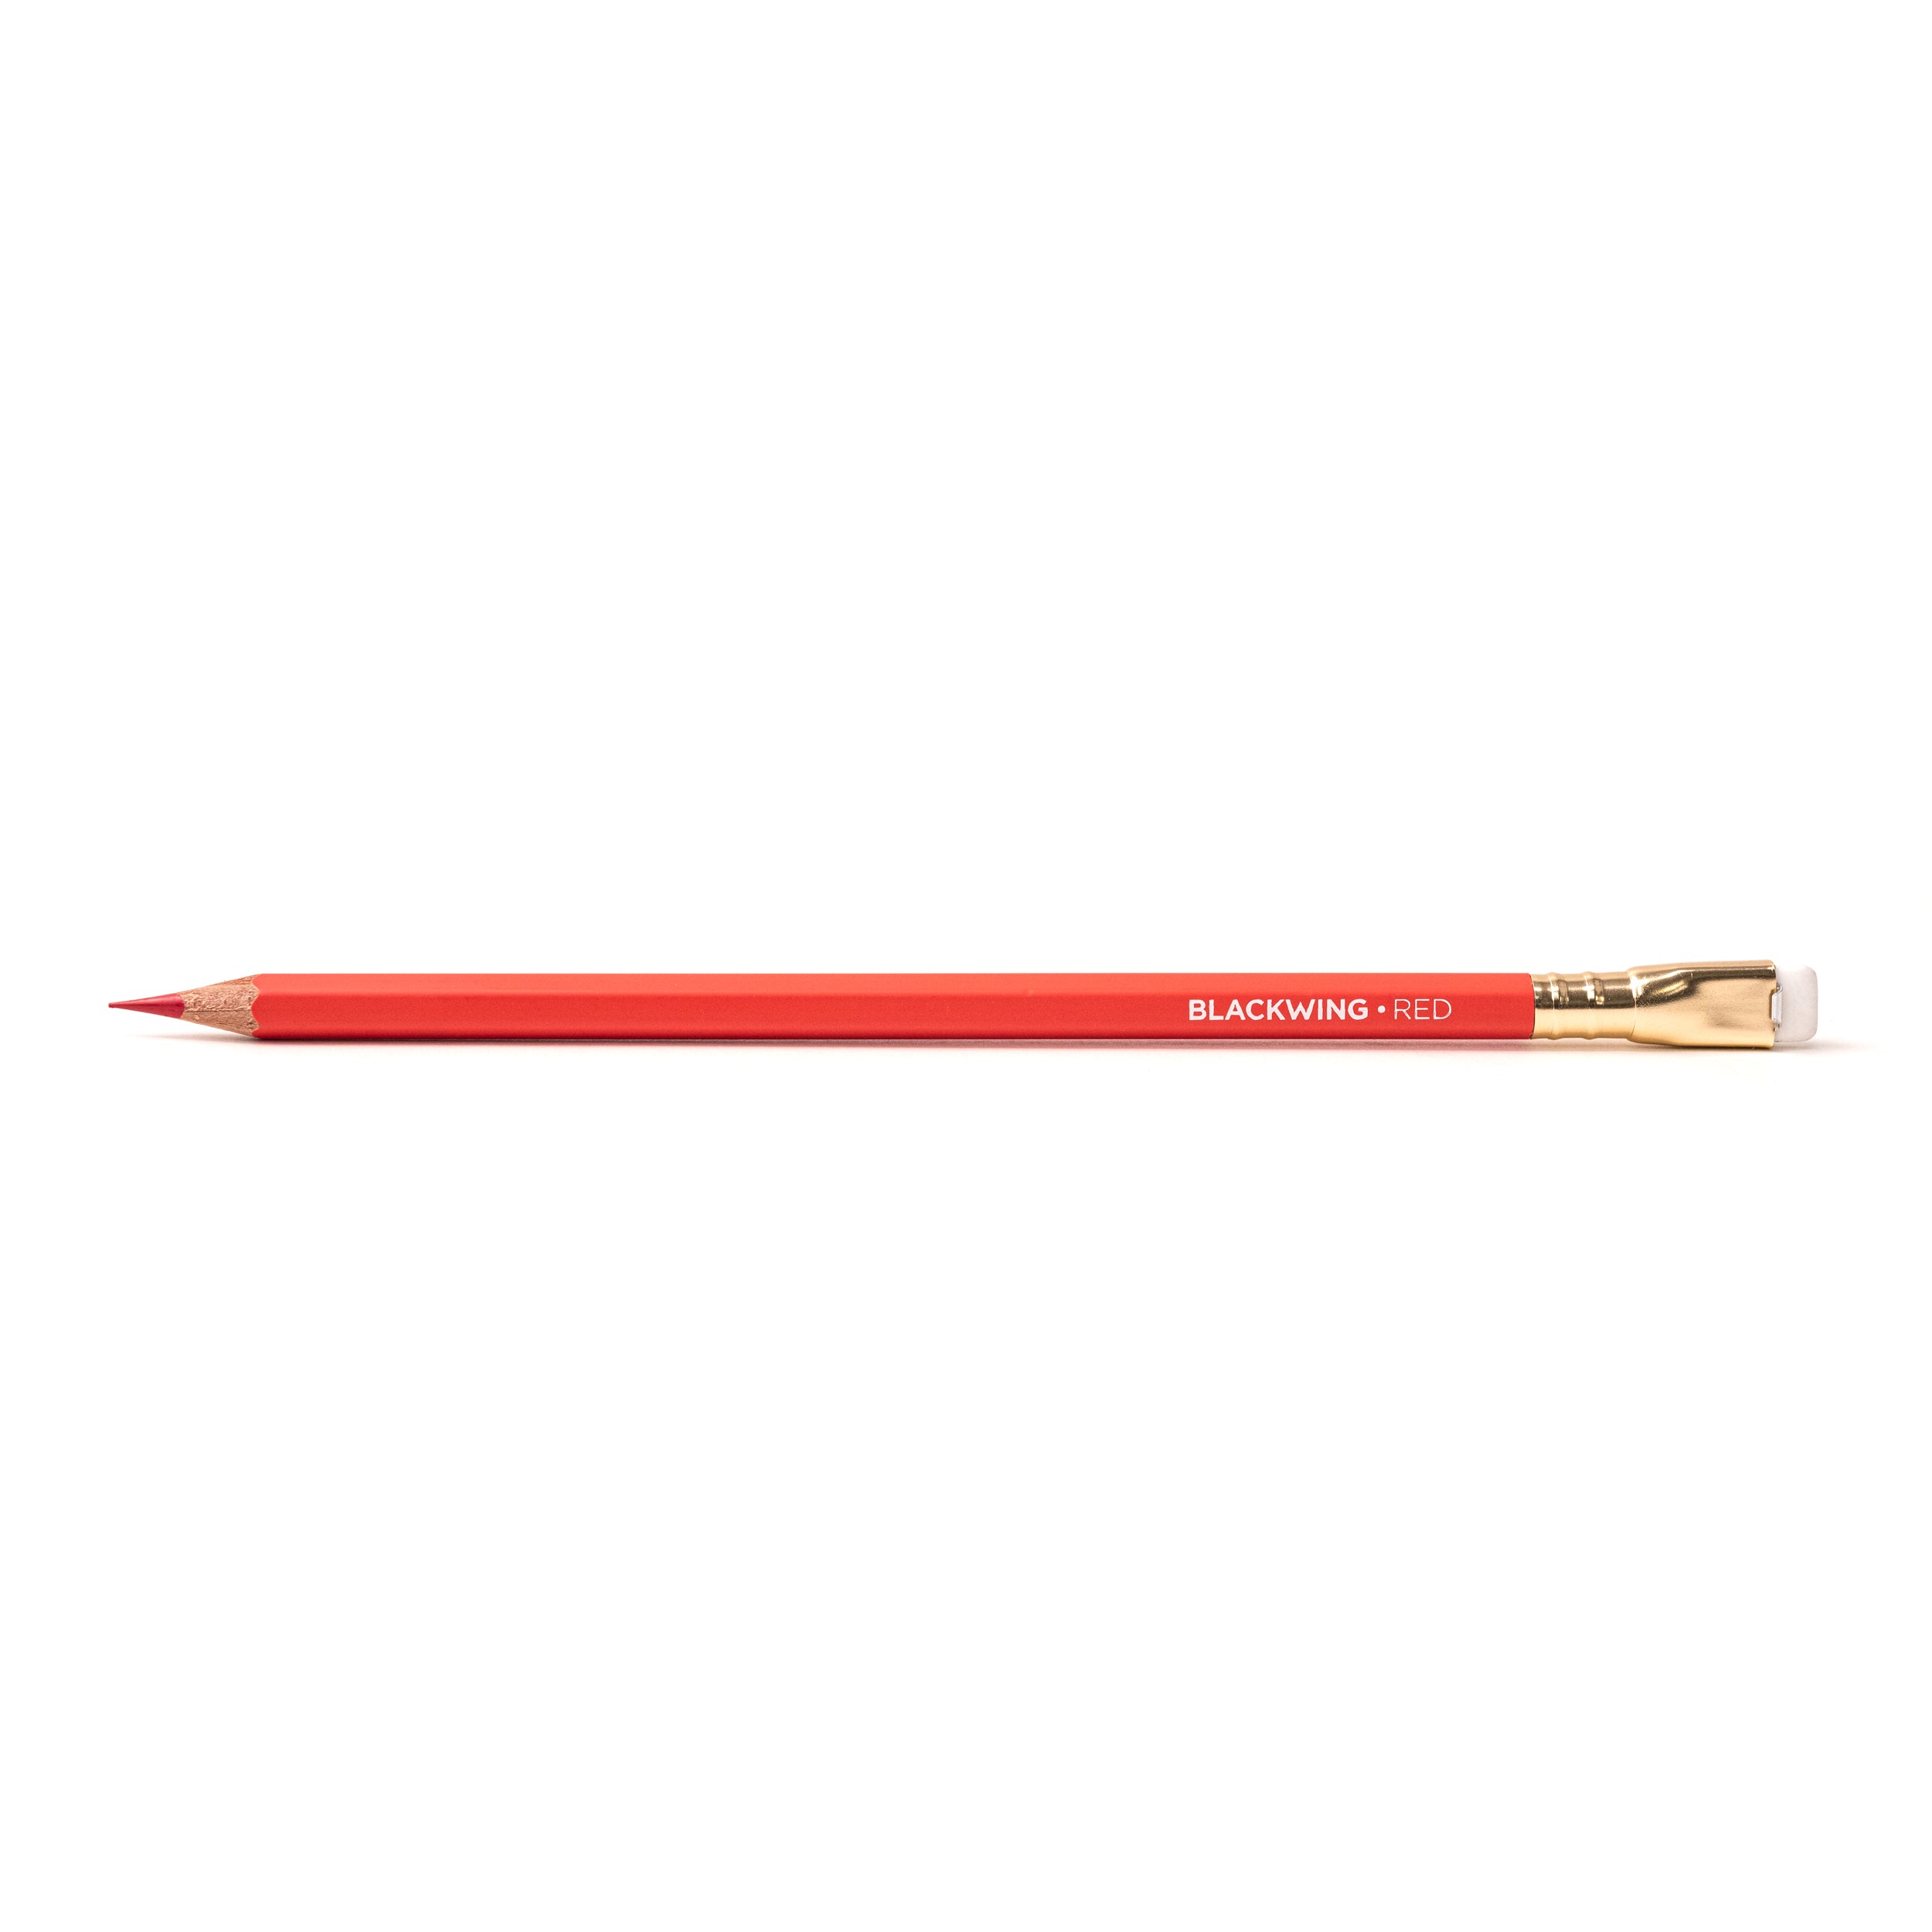 A Blackwing Red pencil on a white background perfect for sketching.